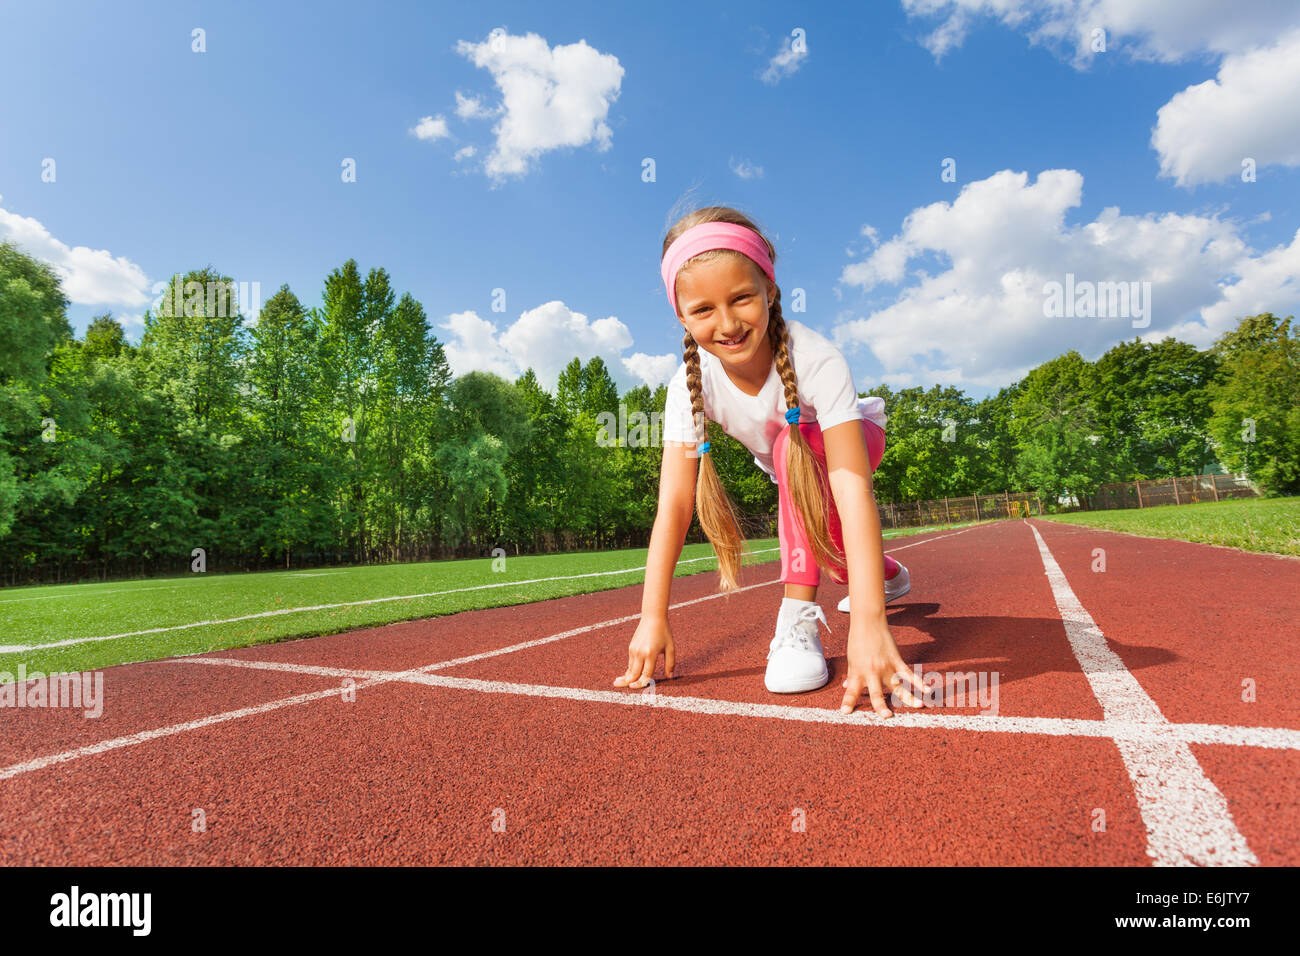 Smiling girl in position on knee ready to run Stock Photo